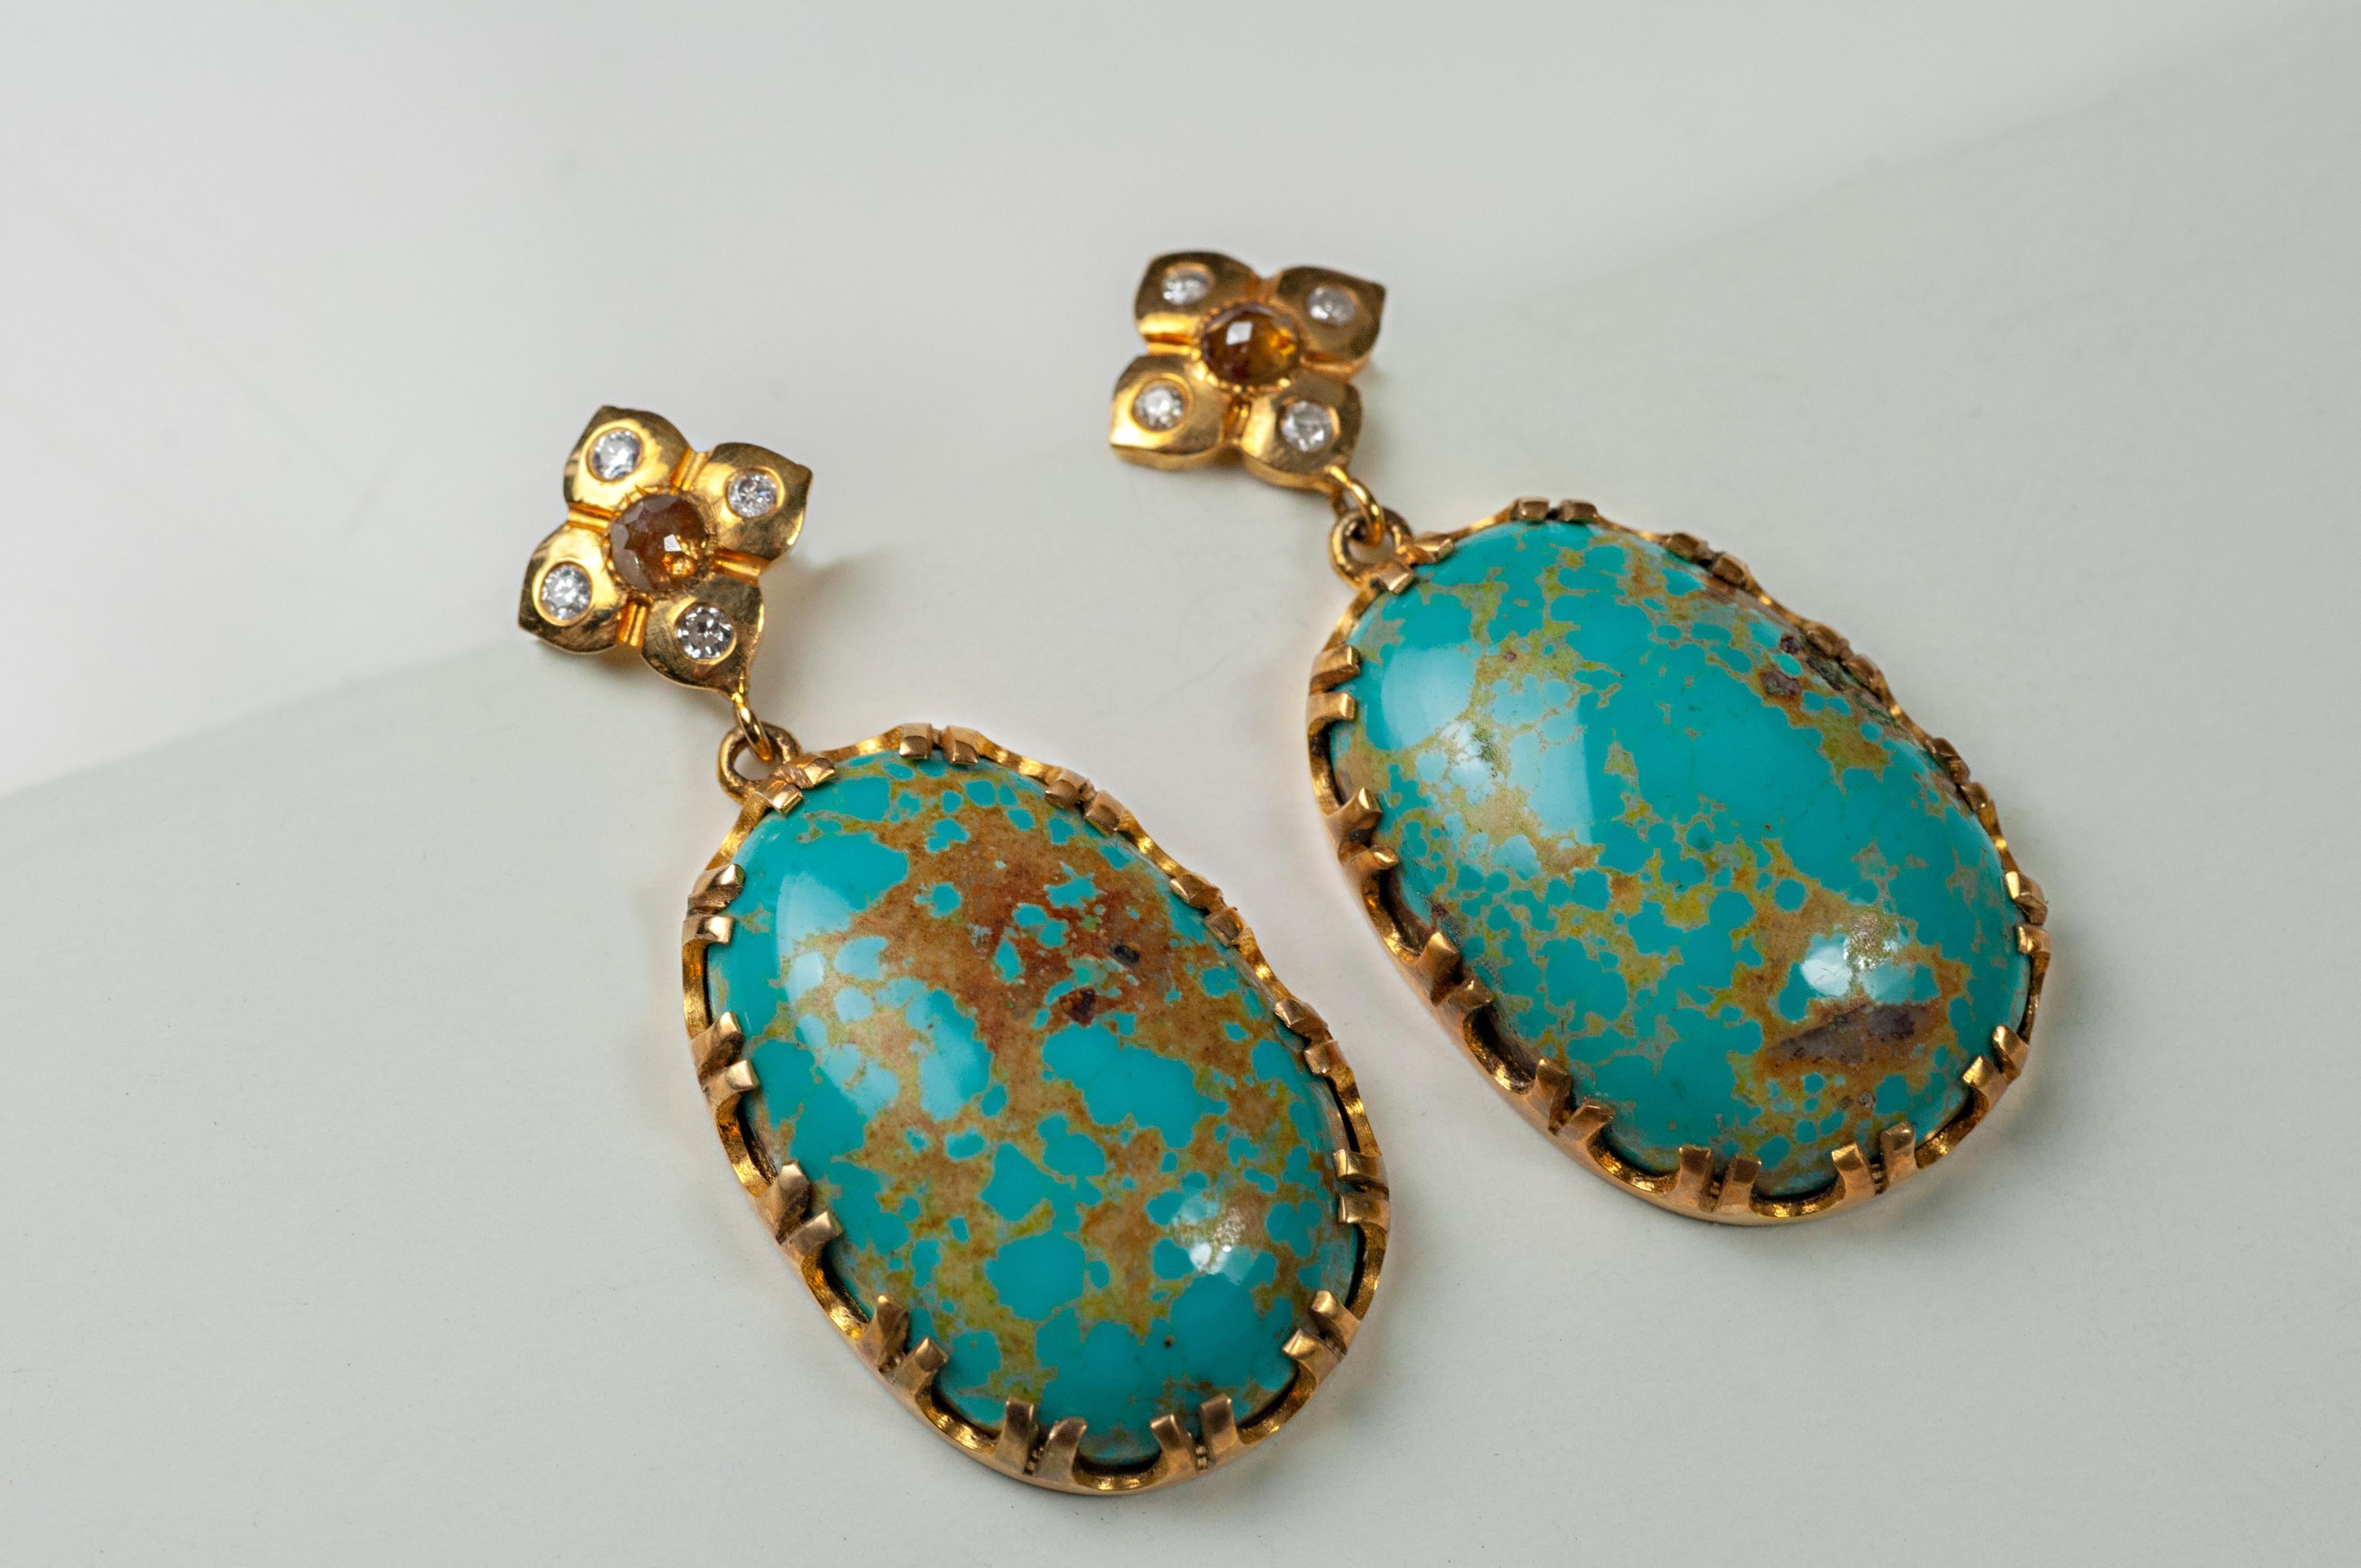 Lone Mountain Turquoise with 18K and 10K yellow gold. Rose cut diamond 0.05cts and pave diamonds 0.03cts. 

Of the famous American Turquoise mines the Lone Mountain Turquoise mine in Nevada is considered to be in the top ten most famous. It produces